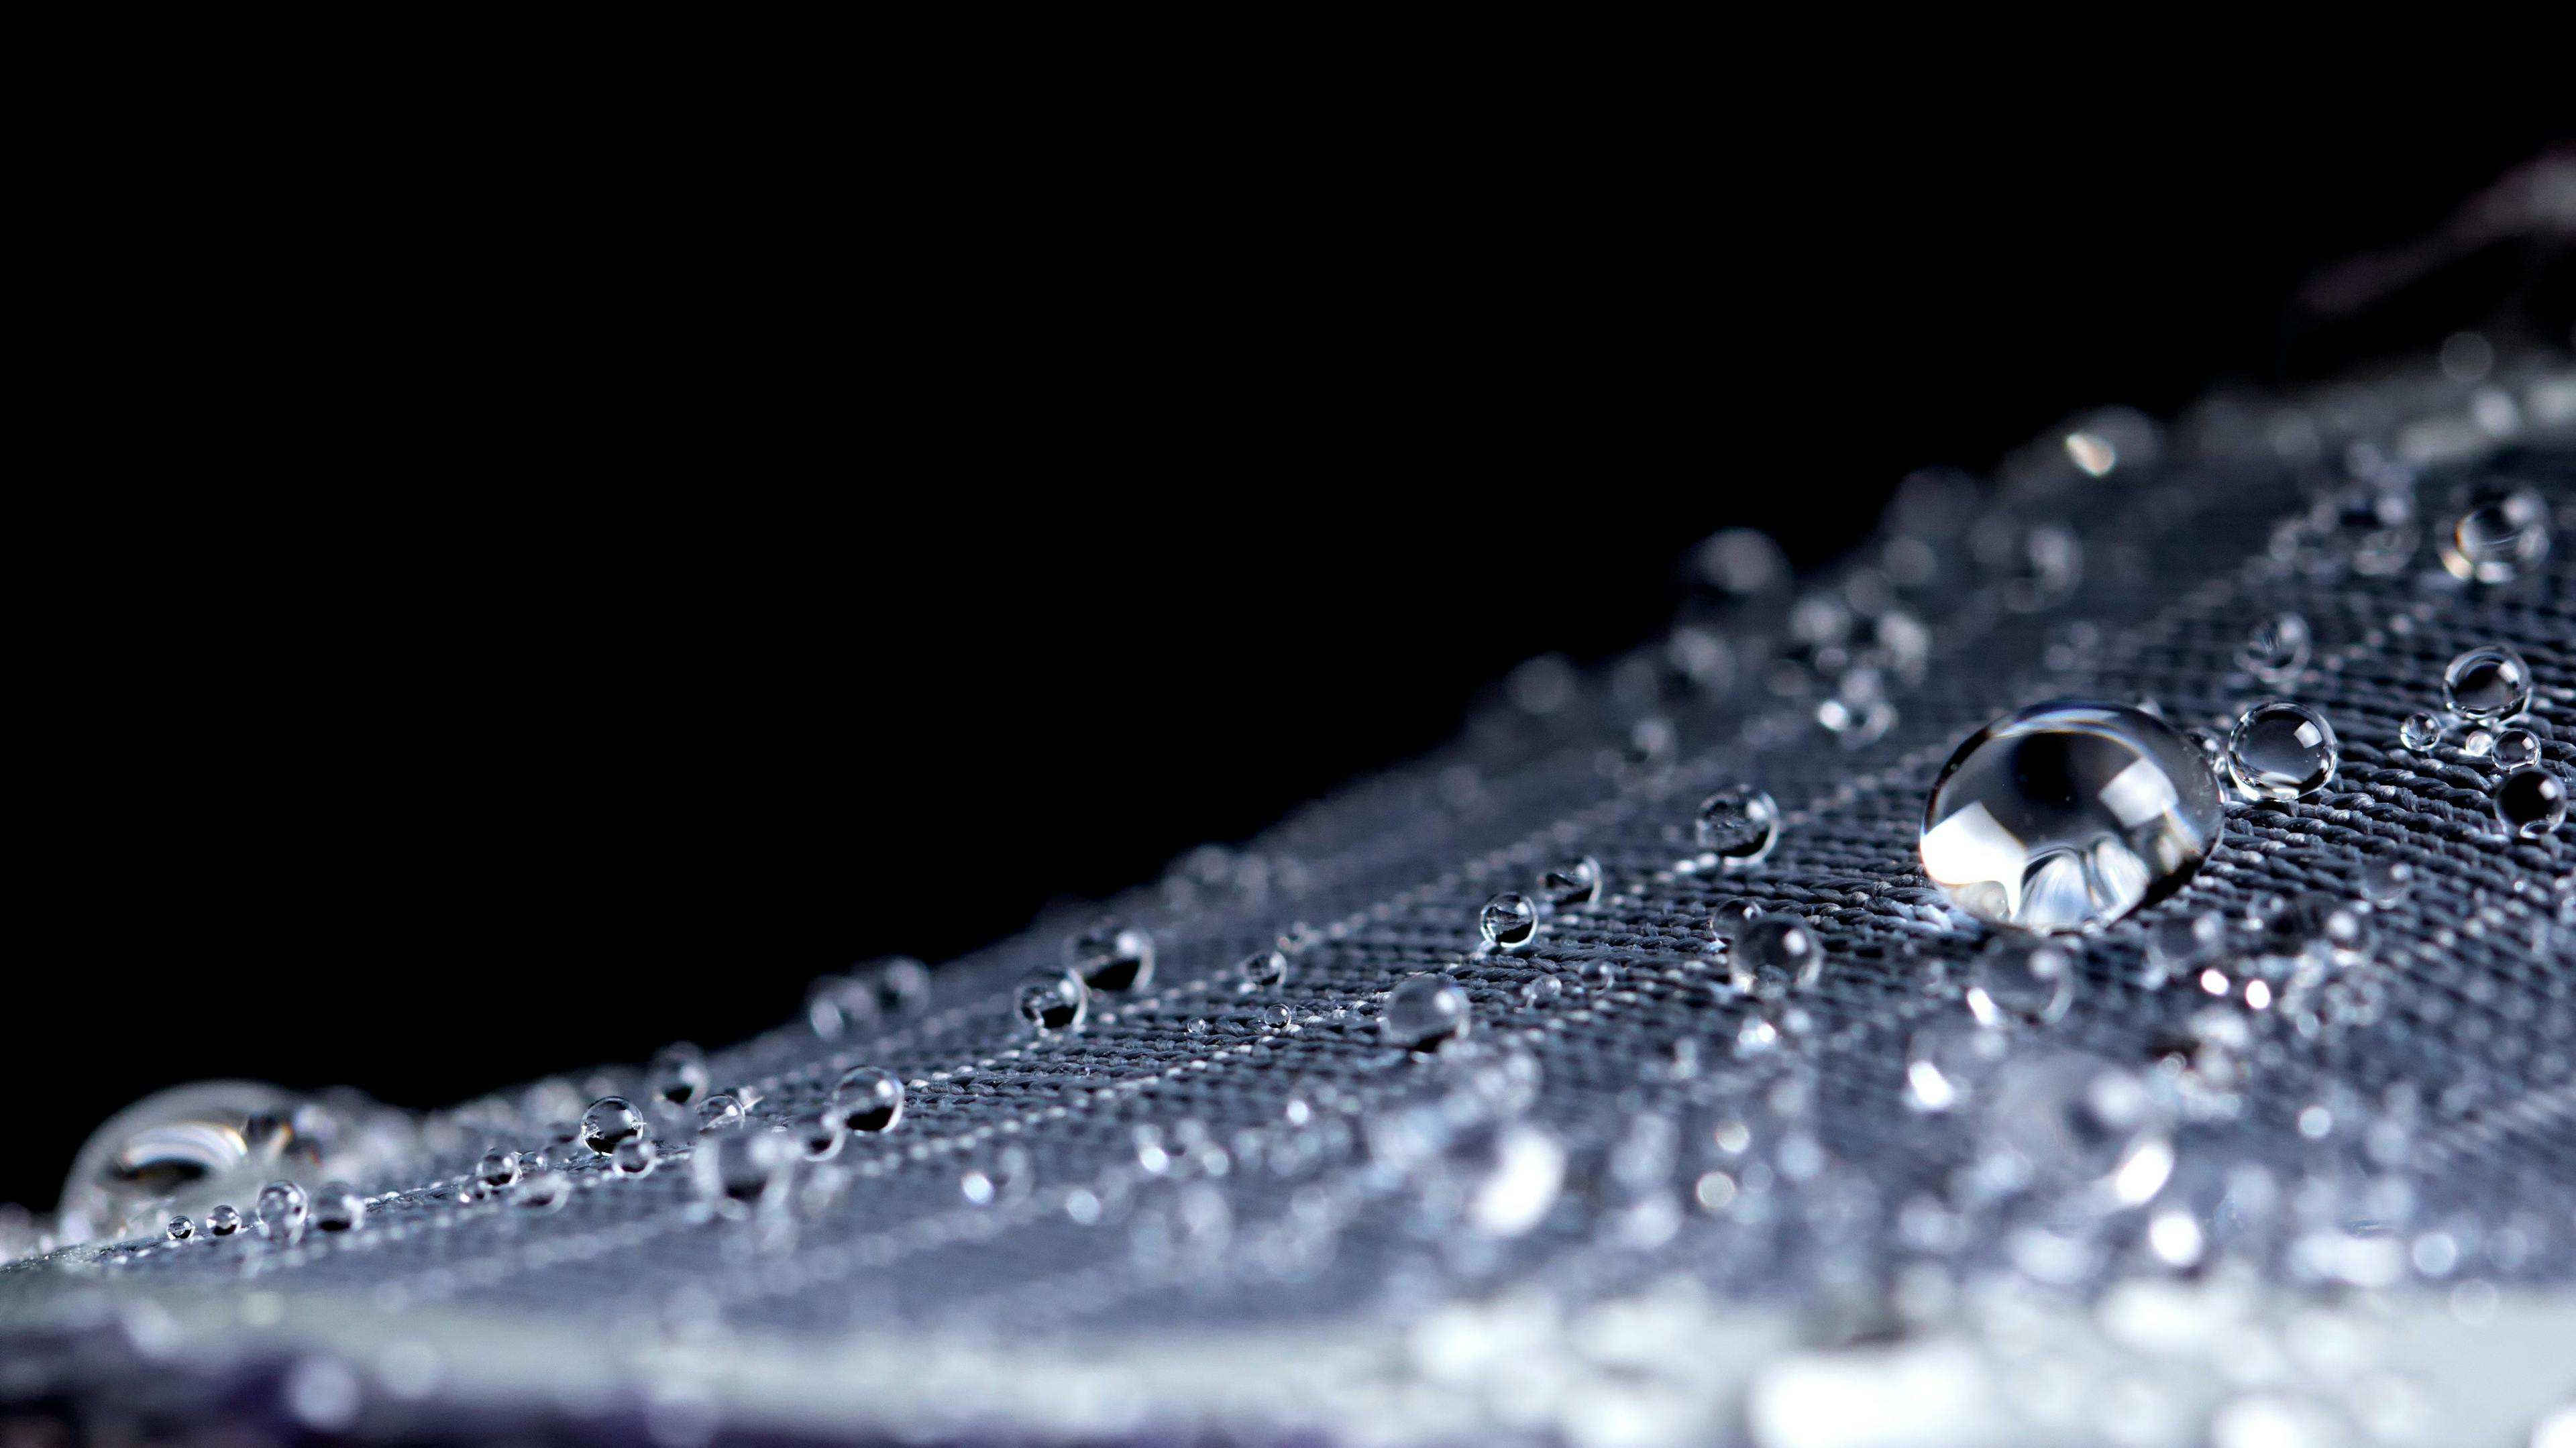 water resistant membrane fabric with water droplets | Image Credit: © maykal - stock.adobe.com